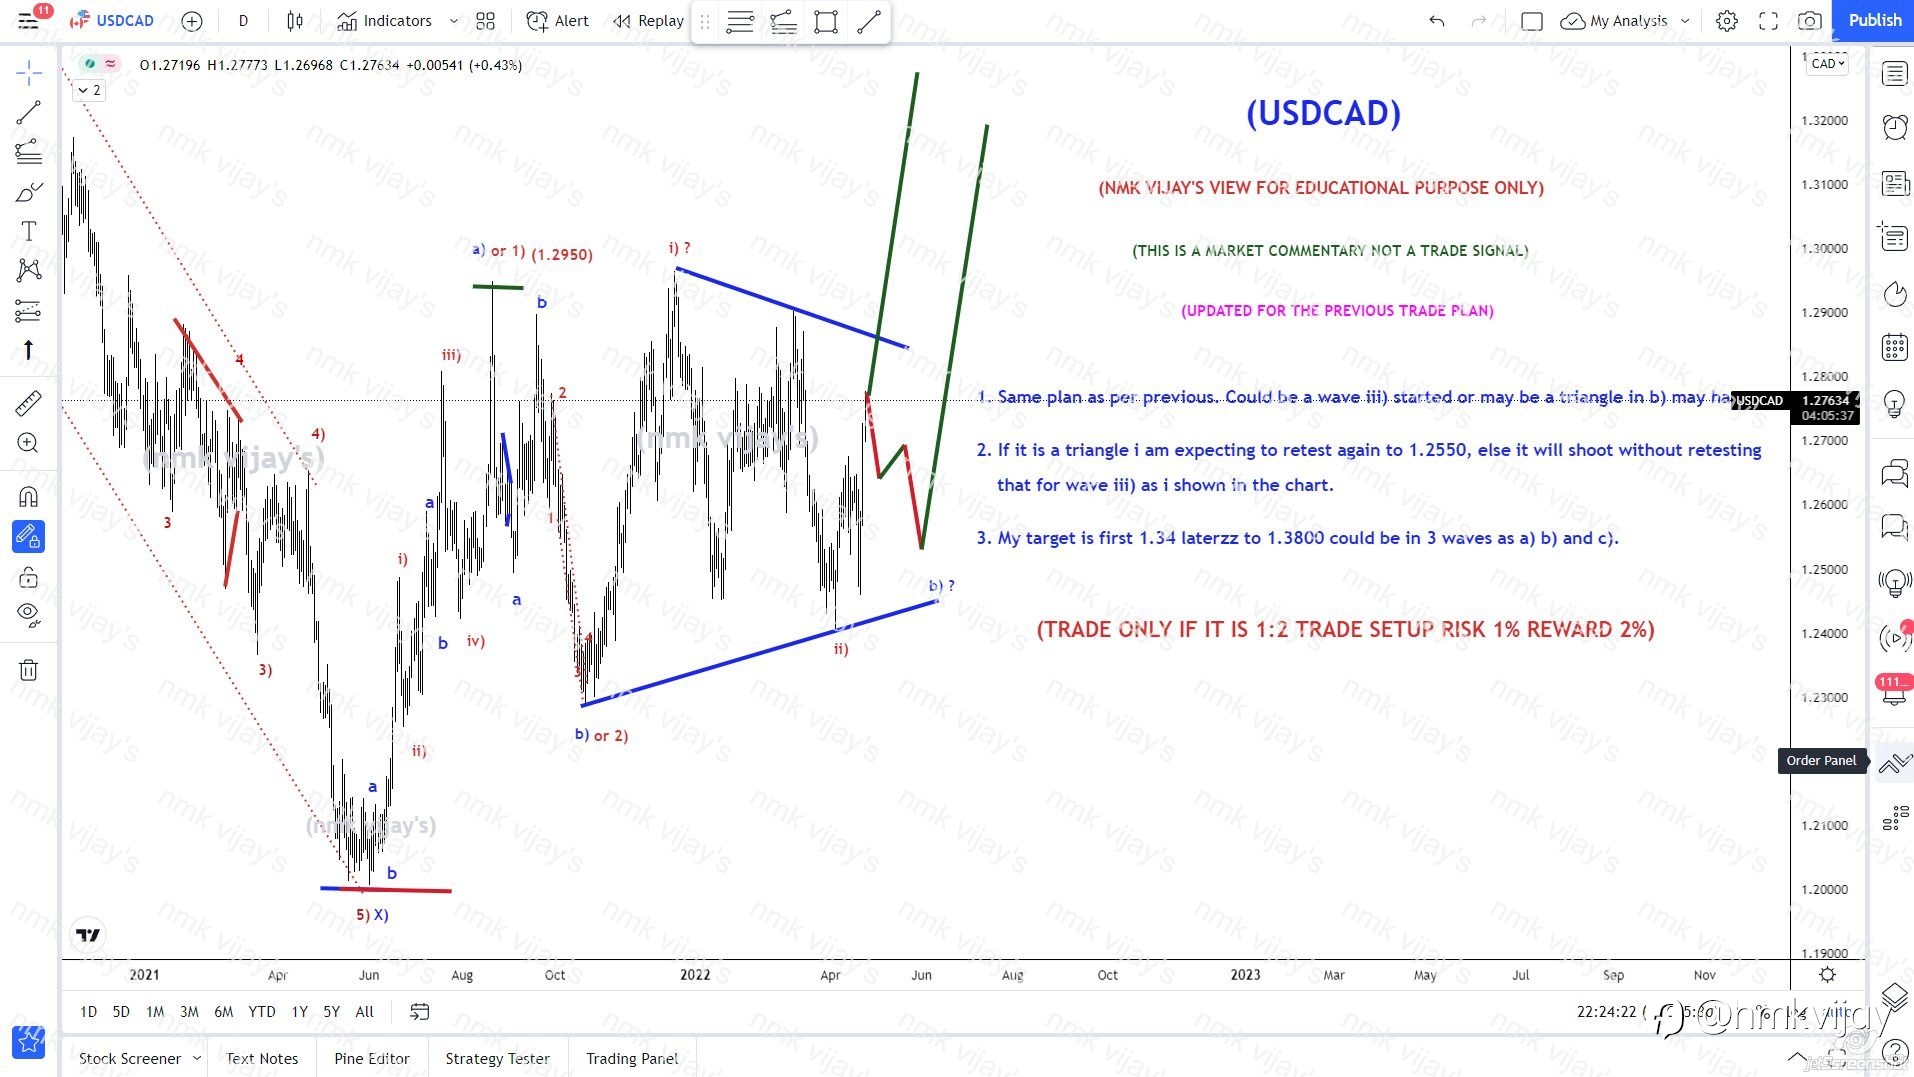 USDCAD-Same Plan either b) wave as triangle or wave iii)